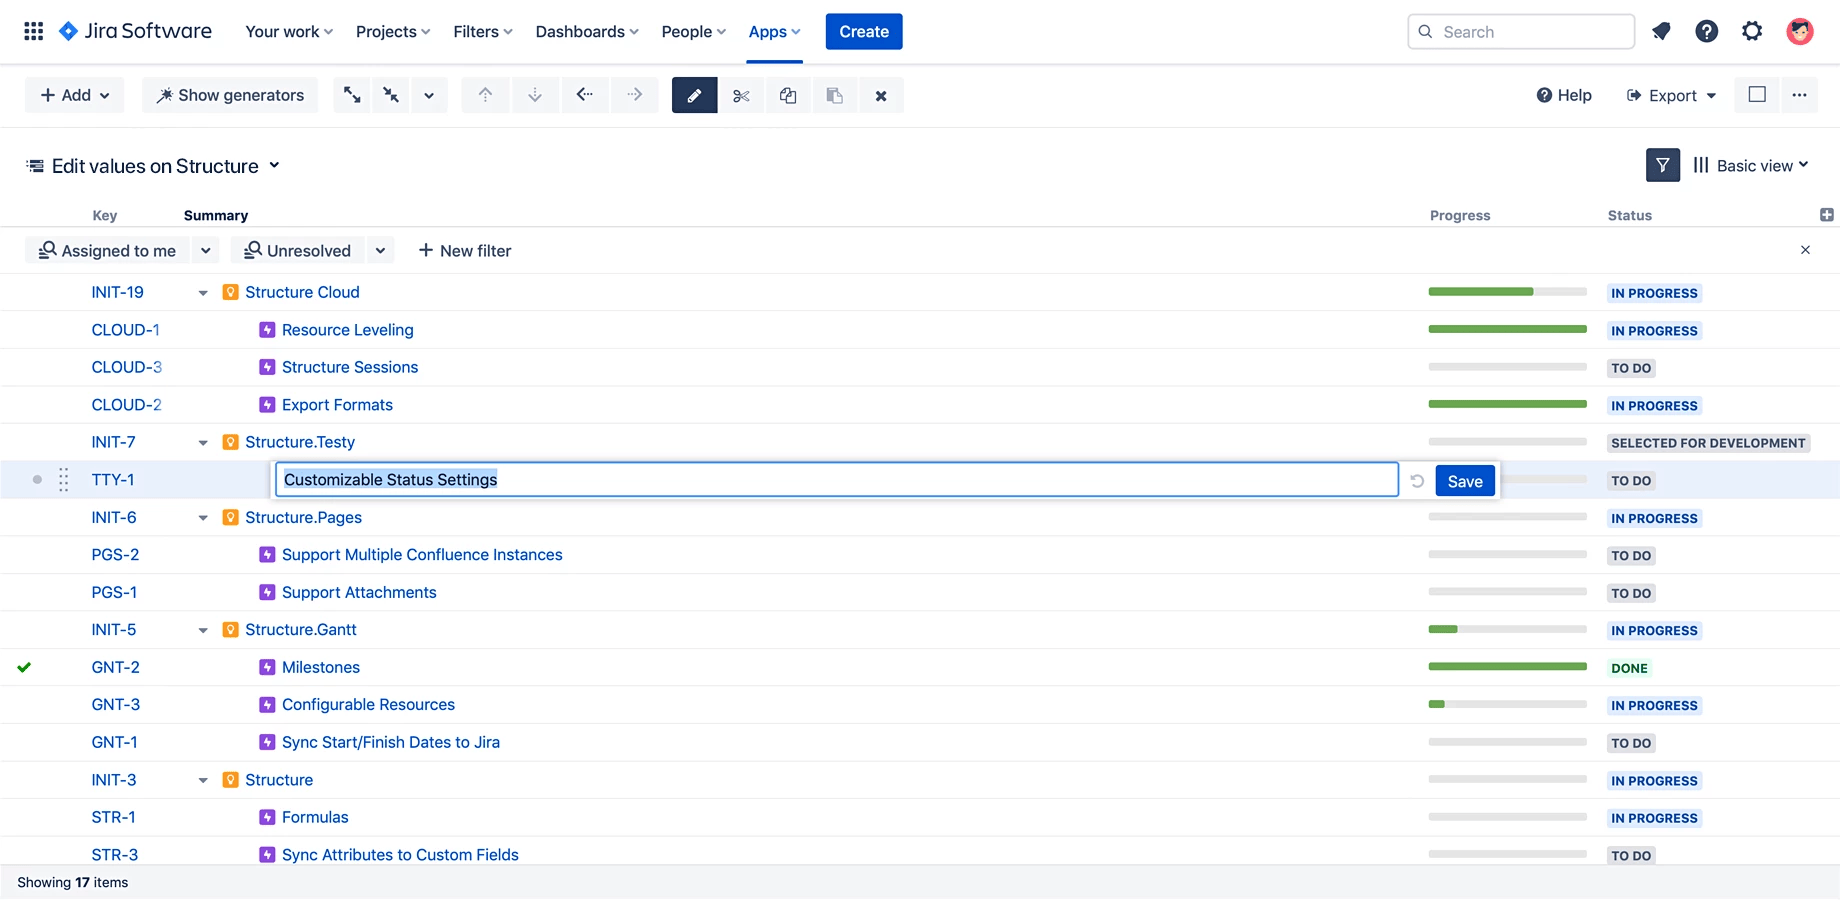 Edit values on the fly – Tired of editing one Jira issue at a time? Save time with in-line editing. Just double-click to edit a value directly in Structure. The changes are saved to the Jira issue instantly.